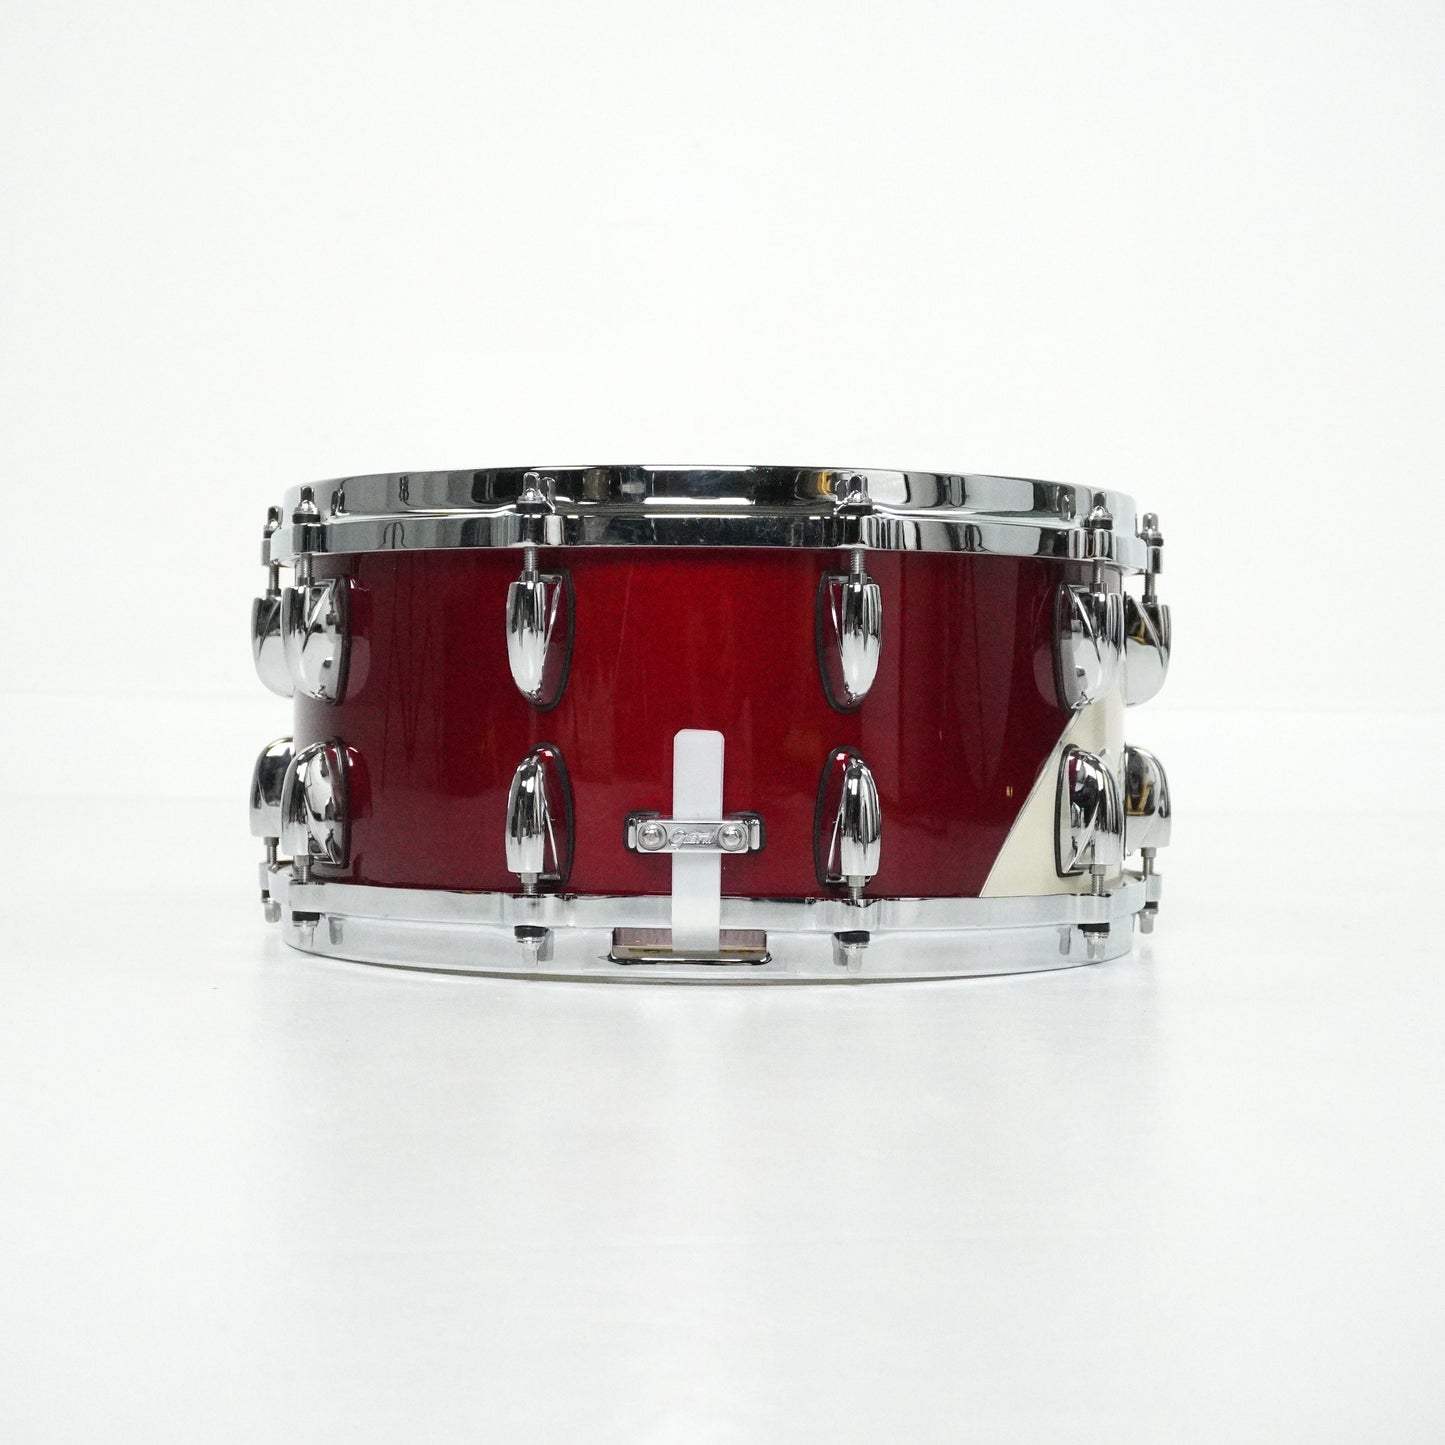 Gretsch 14" x 6.5" Renown ‘57’ Motor City Red Snare Drum